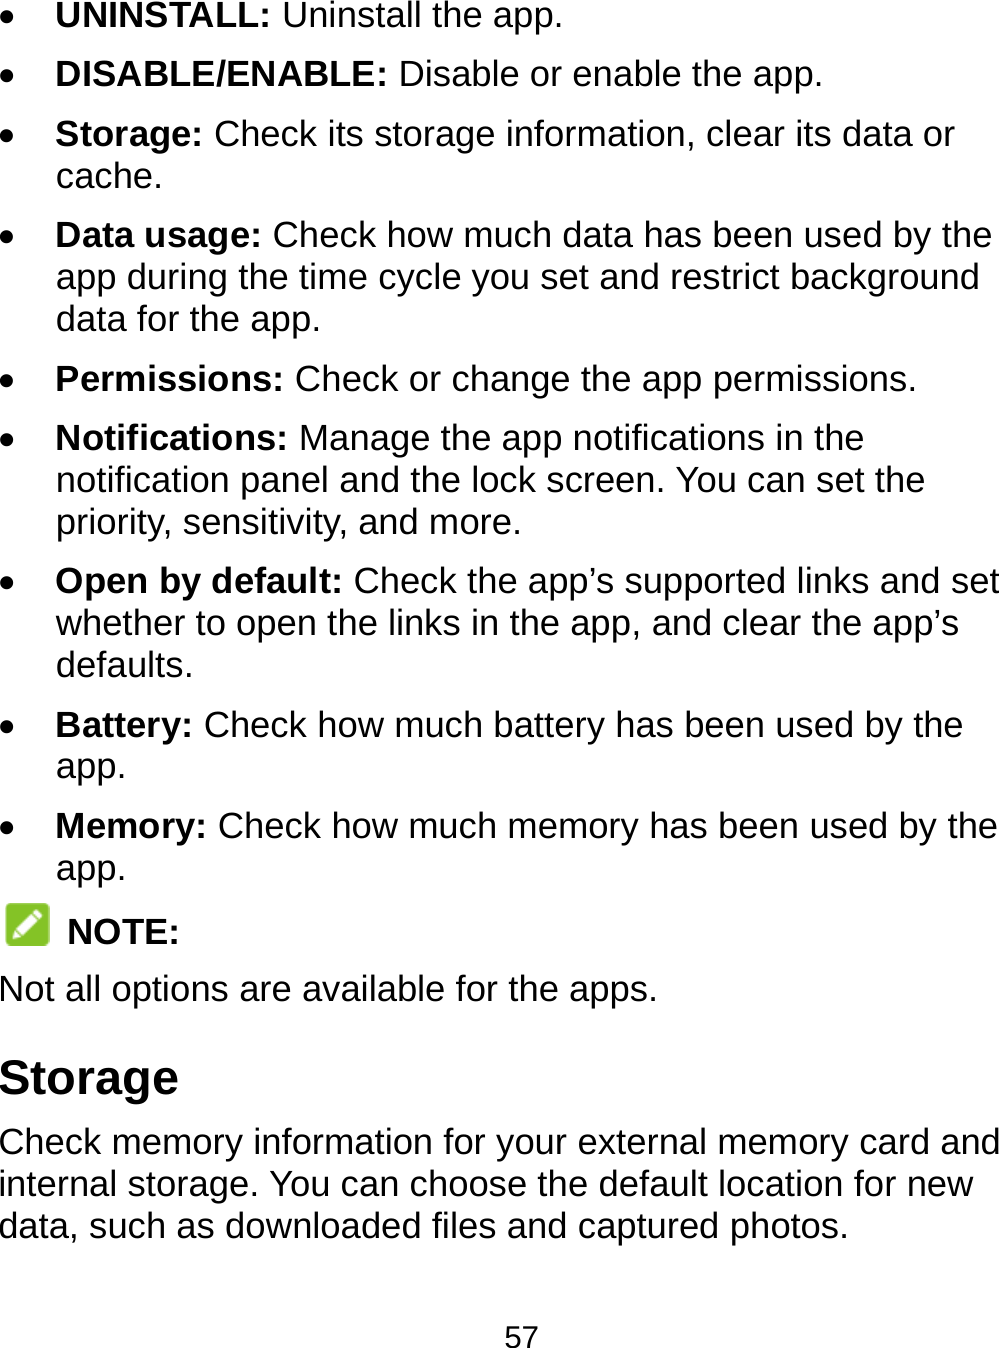  57  UNINSTALL: Uninstall the app.  DISABLE/ENABLE: Disable or enable the app.  Storage: Check its storage information, clear its data or cache.  Data usage: Check how much data has been used by the app during the time cycle you set and restrict background data for the app.  Permissions: Check or change the app permissions.  Notifications: Manage the app notifications in the notification panel and the lock screen. You can set the priority, sensitivity, and more.  Open by default: Check the app’s supported links and set whether to open the links in the app, and clear the app’s defaults.  Battery: Check how much battery has been used by the app.  Memory: Check how much memory has been used by the app.  NOTE: Not all options are available for the apps. Storage Check memory information for your external memory card and internal storage. You can choose the default location for new data, such as downloaded files and captured photos. 